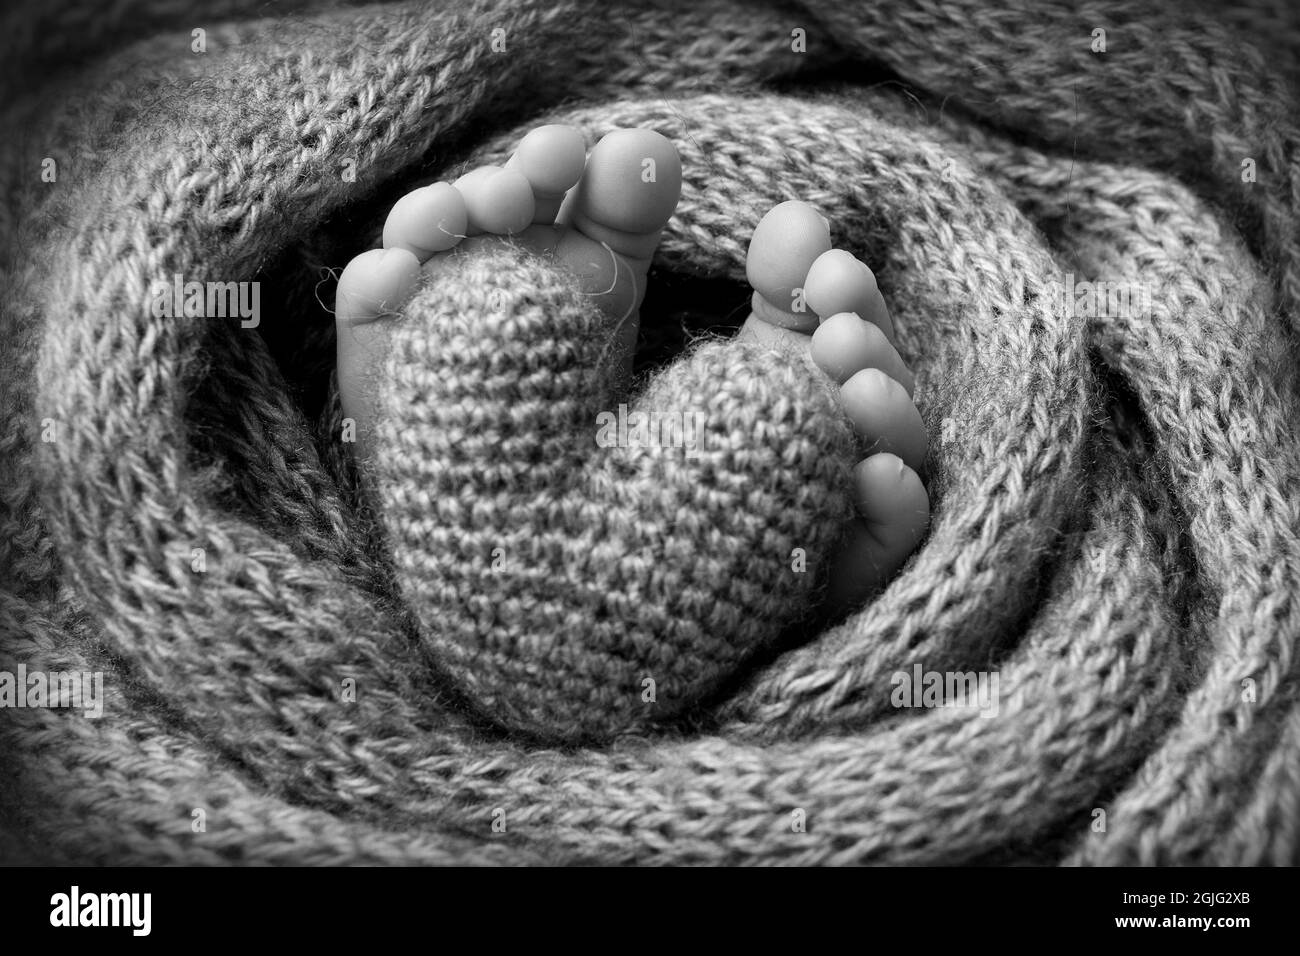 legs of a newborn baby, soft knitted blanket gray white heart, black and white studio photography. Stock Photo